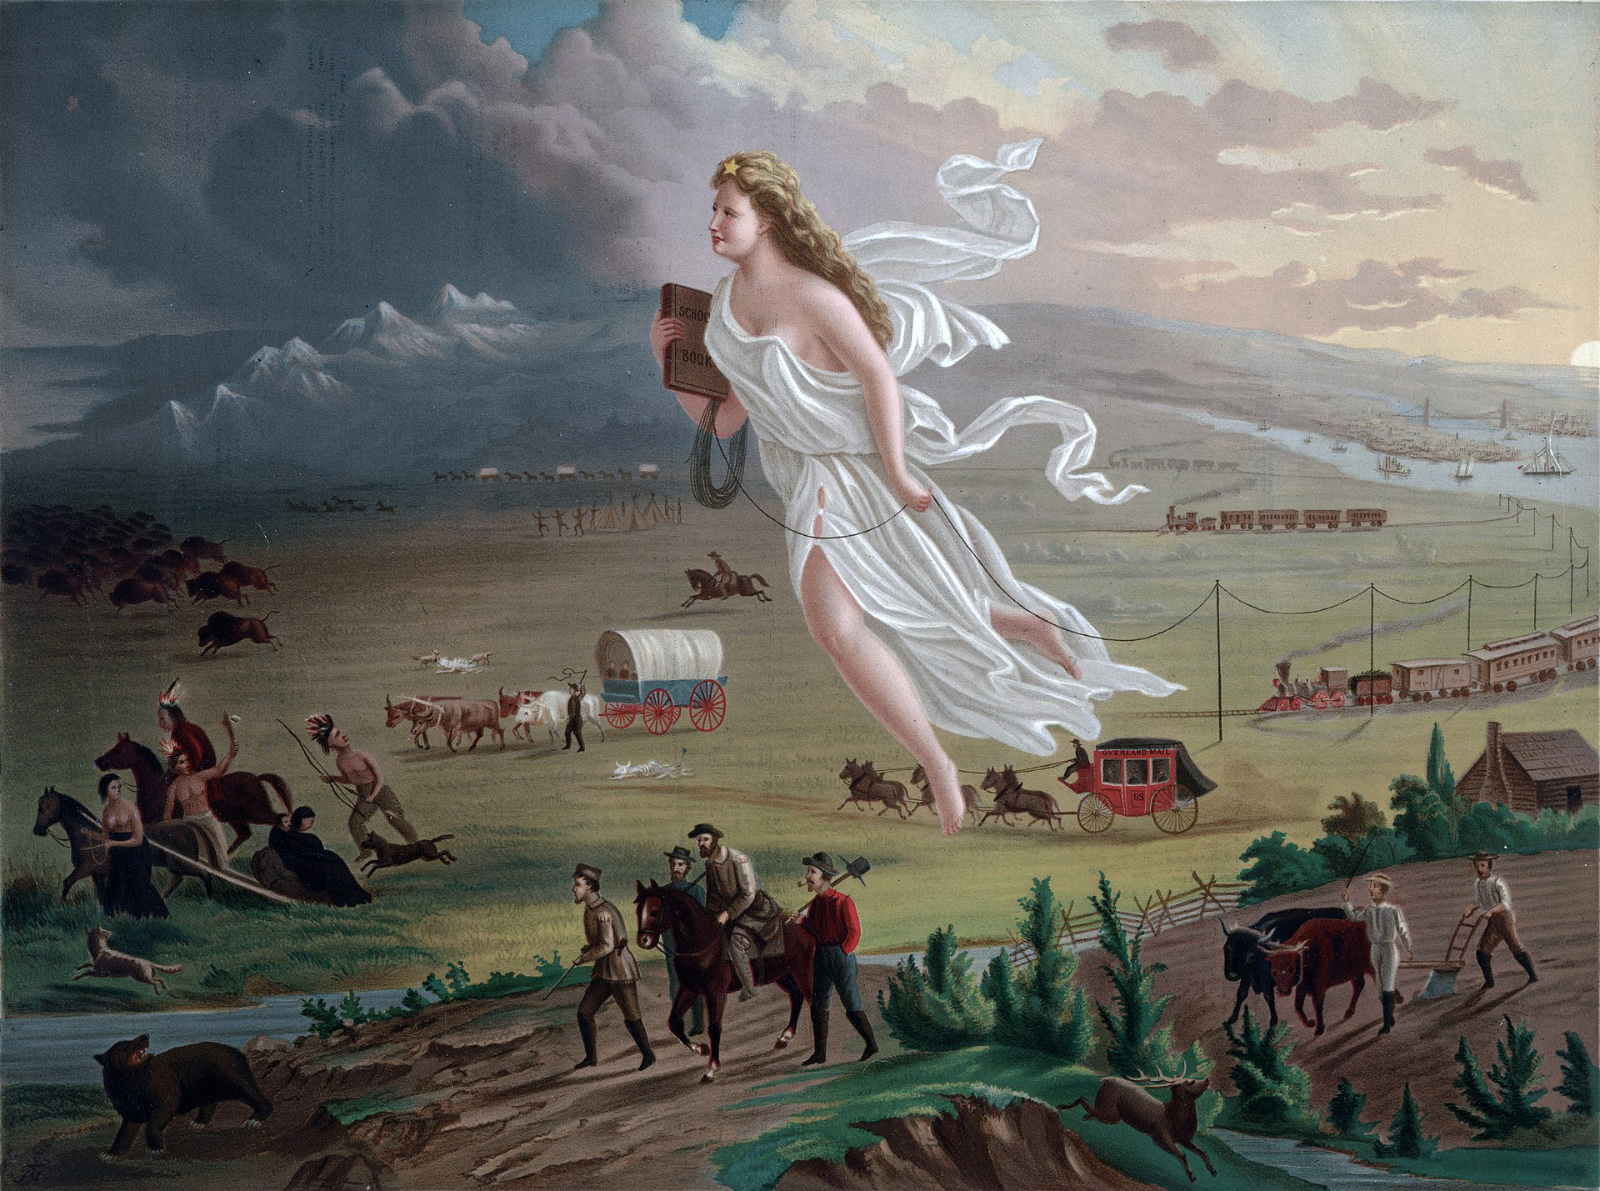 1872 painting "american progress": An outdoor scene of a prairie with farmland and mountains in the background. Peasants, hunters, carriages, and trains all move from right to left, showing an overt theme of doom. A larger-than-life blonde woman is depicted in the center, manifesting her destiny's virtual blessing.